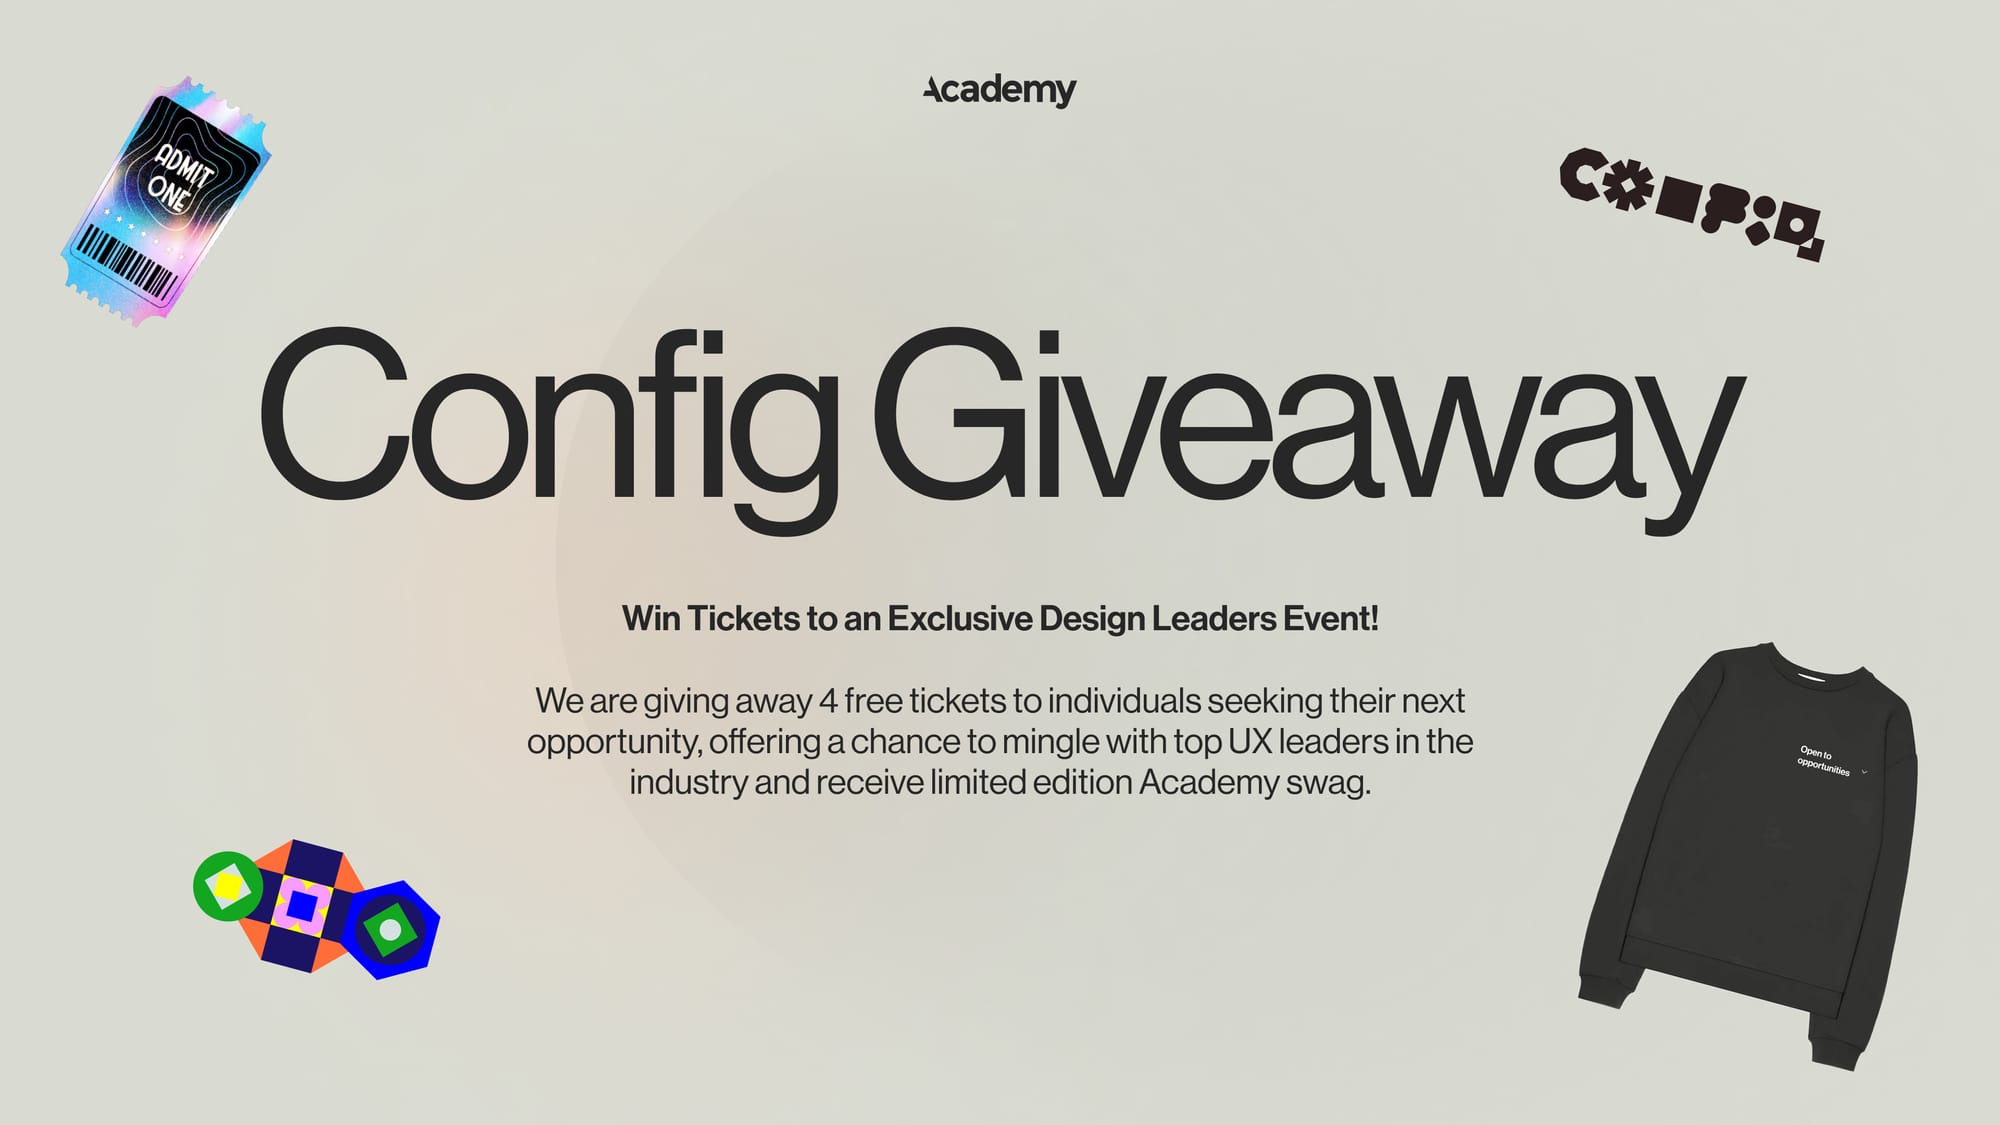 Win Tickets to an Exclusive Design Leaders Event!